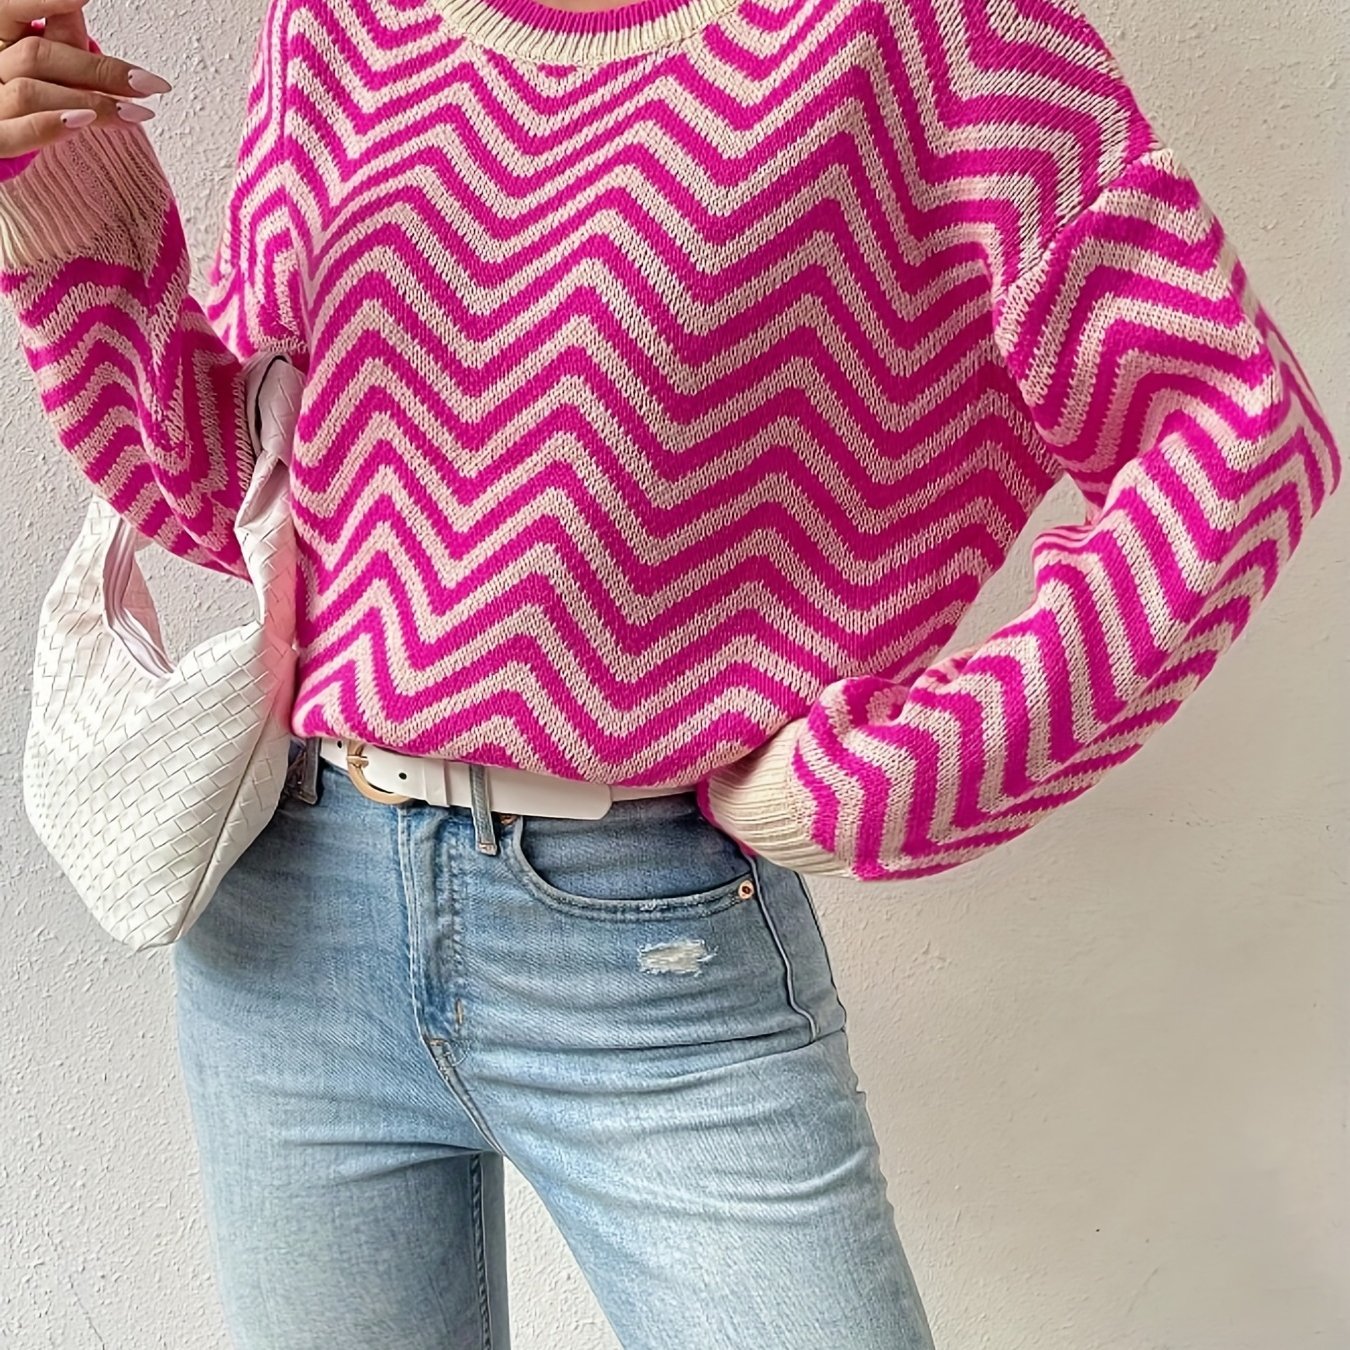 Antmvs Striped Crew Neck Knitted Sweater, Cute Long Sleeve Drop Shoulder Sweater, Women's Clothing